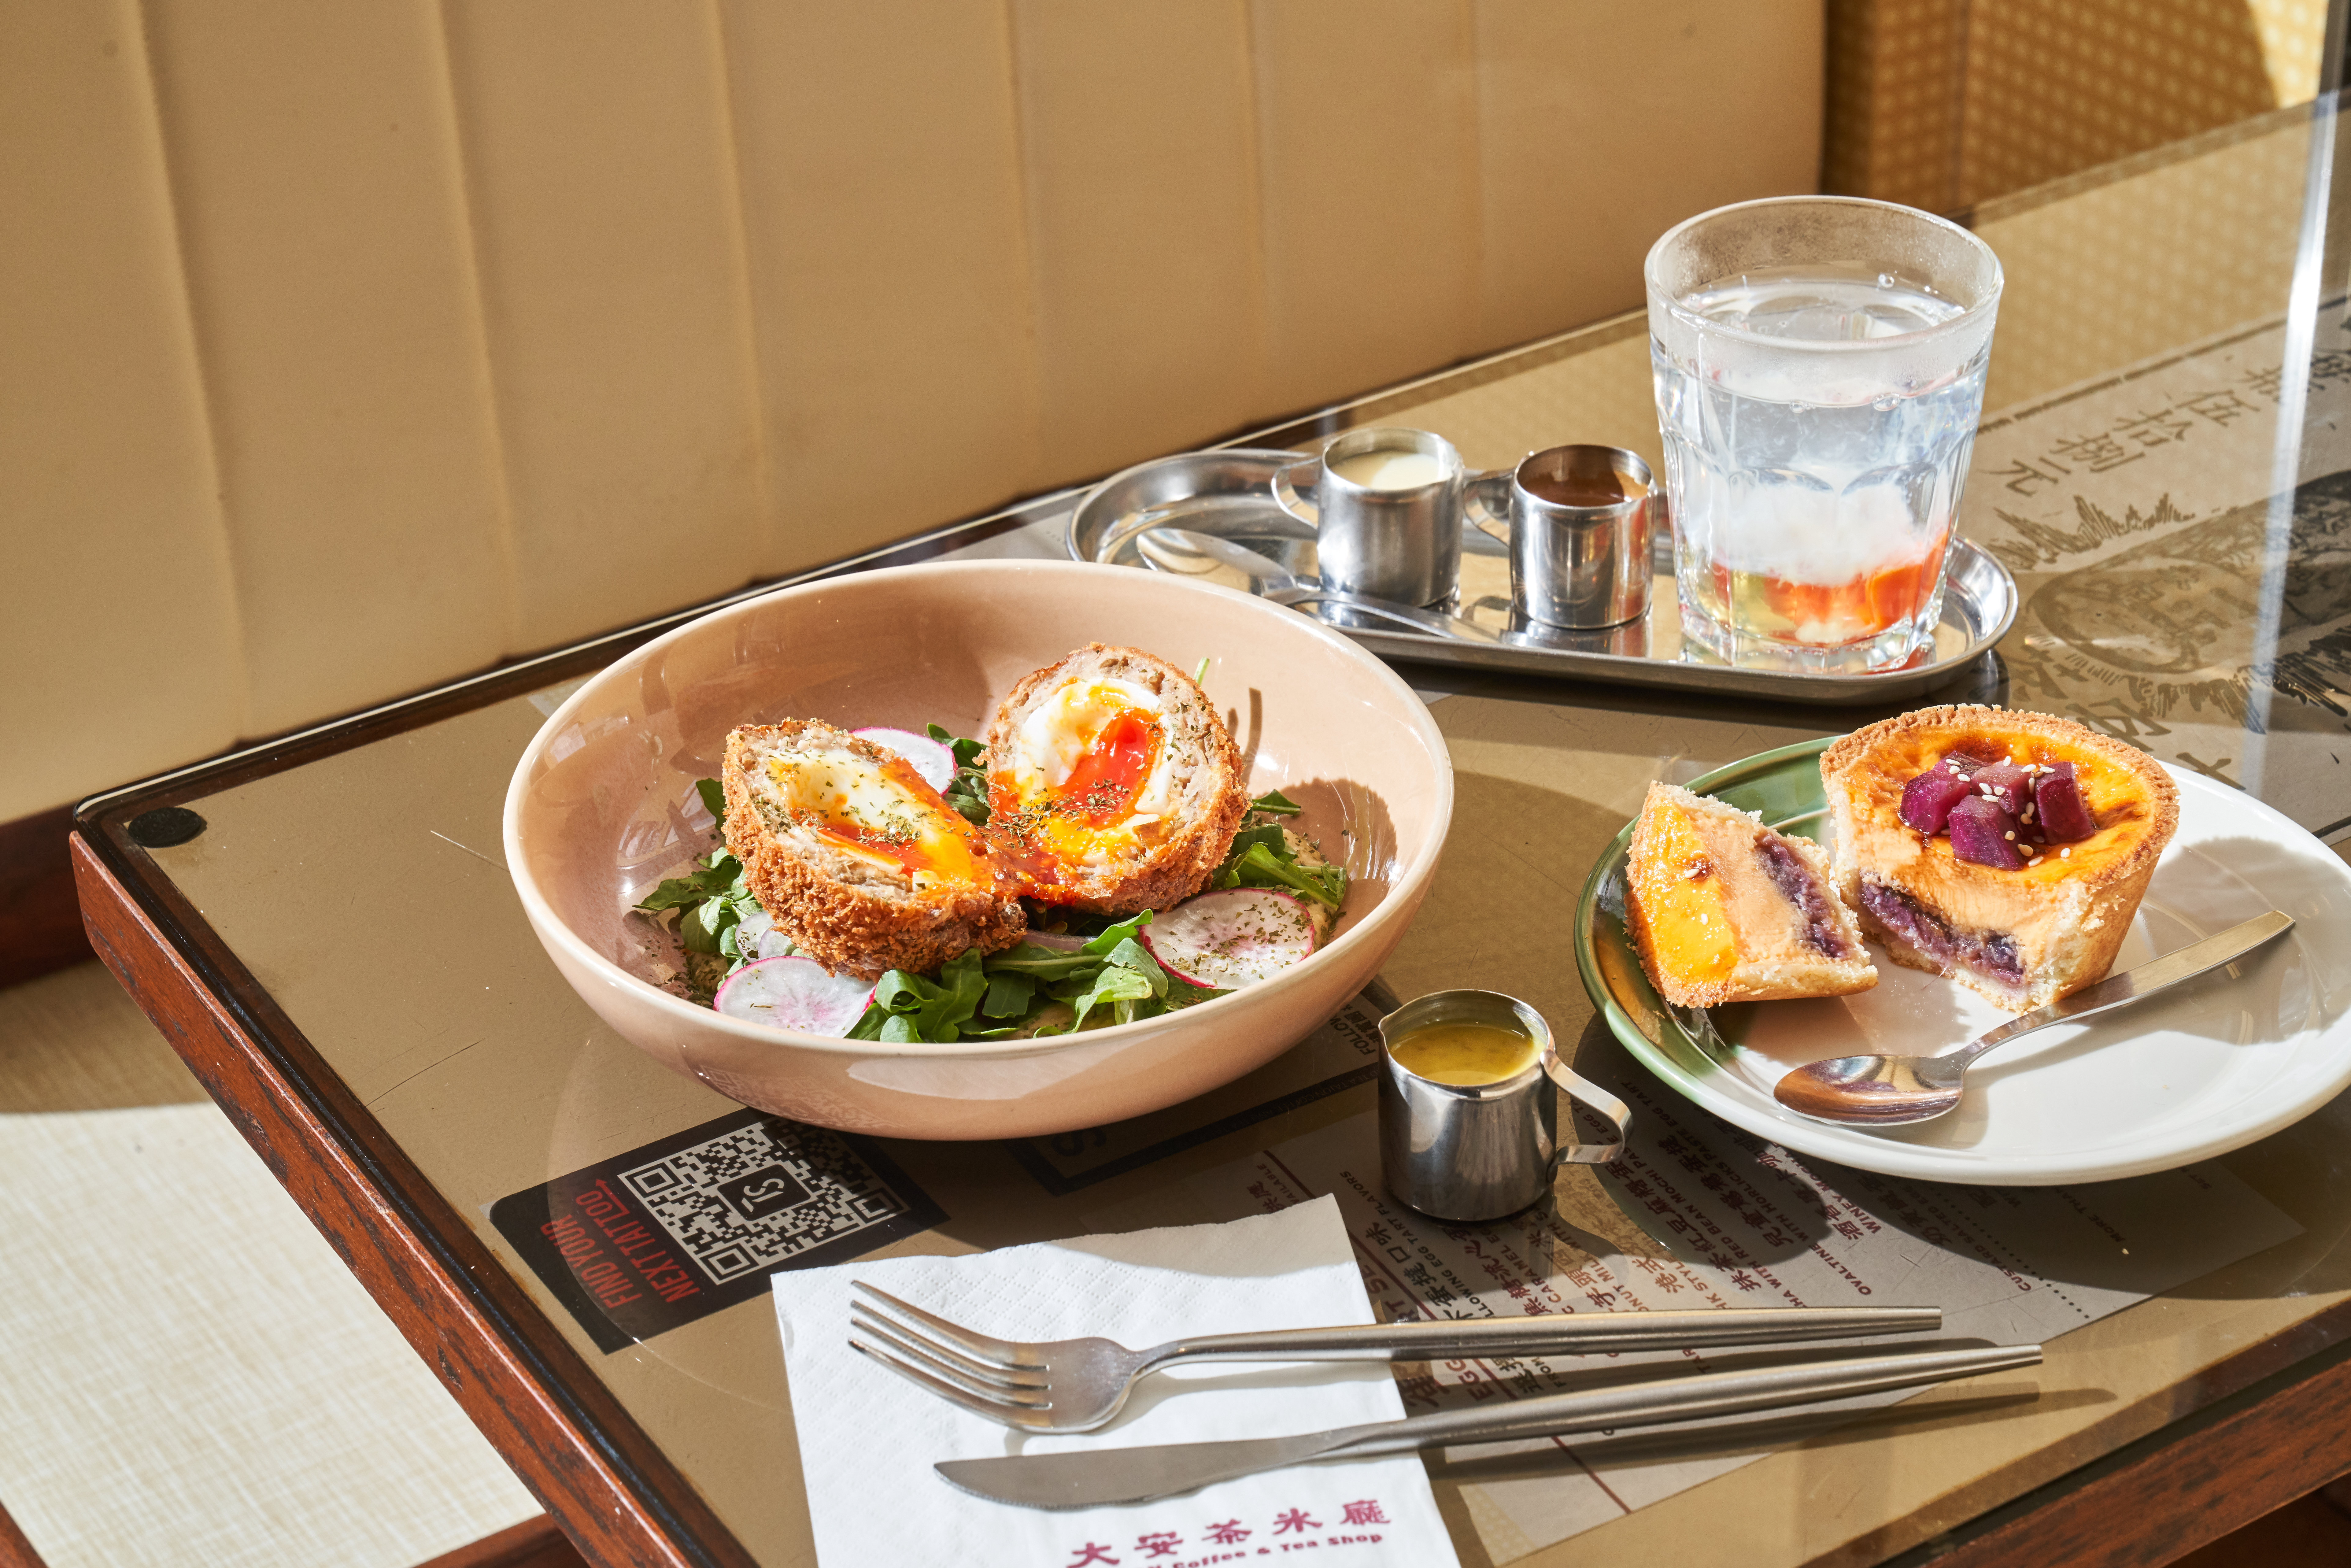 A fusion of traditional and modern Hong Kong-style egg dishes